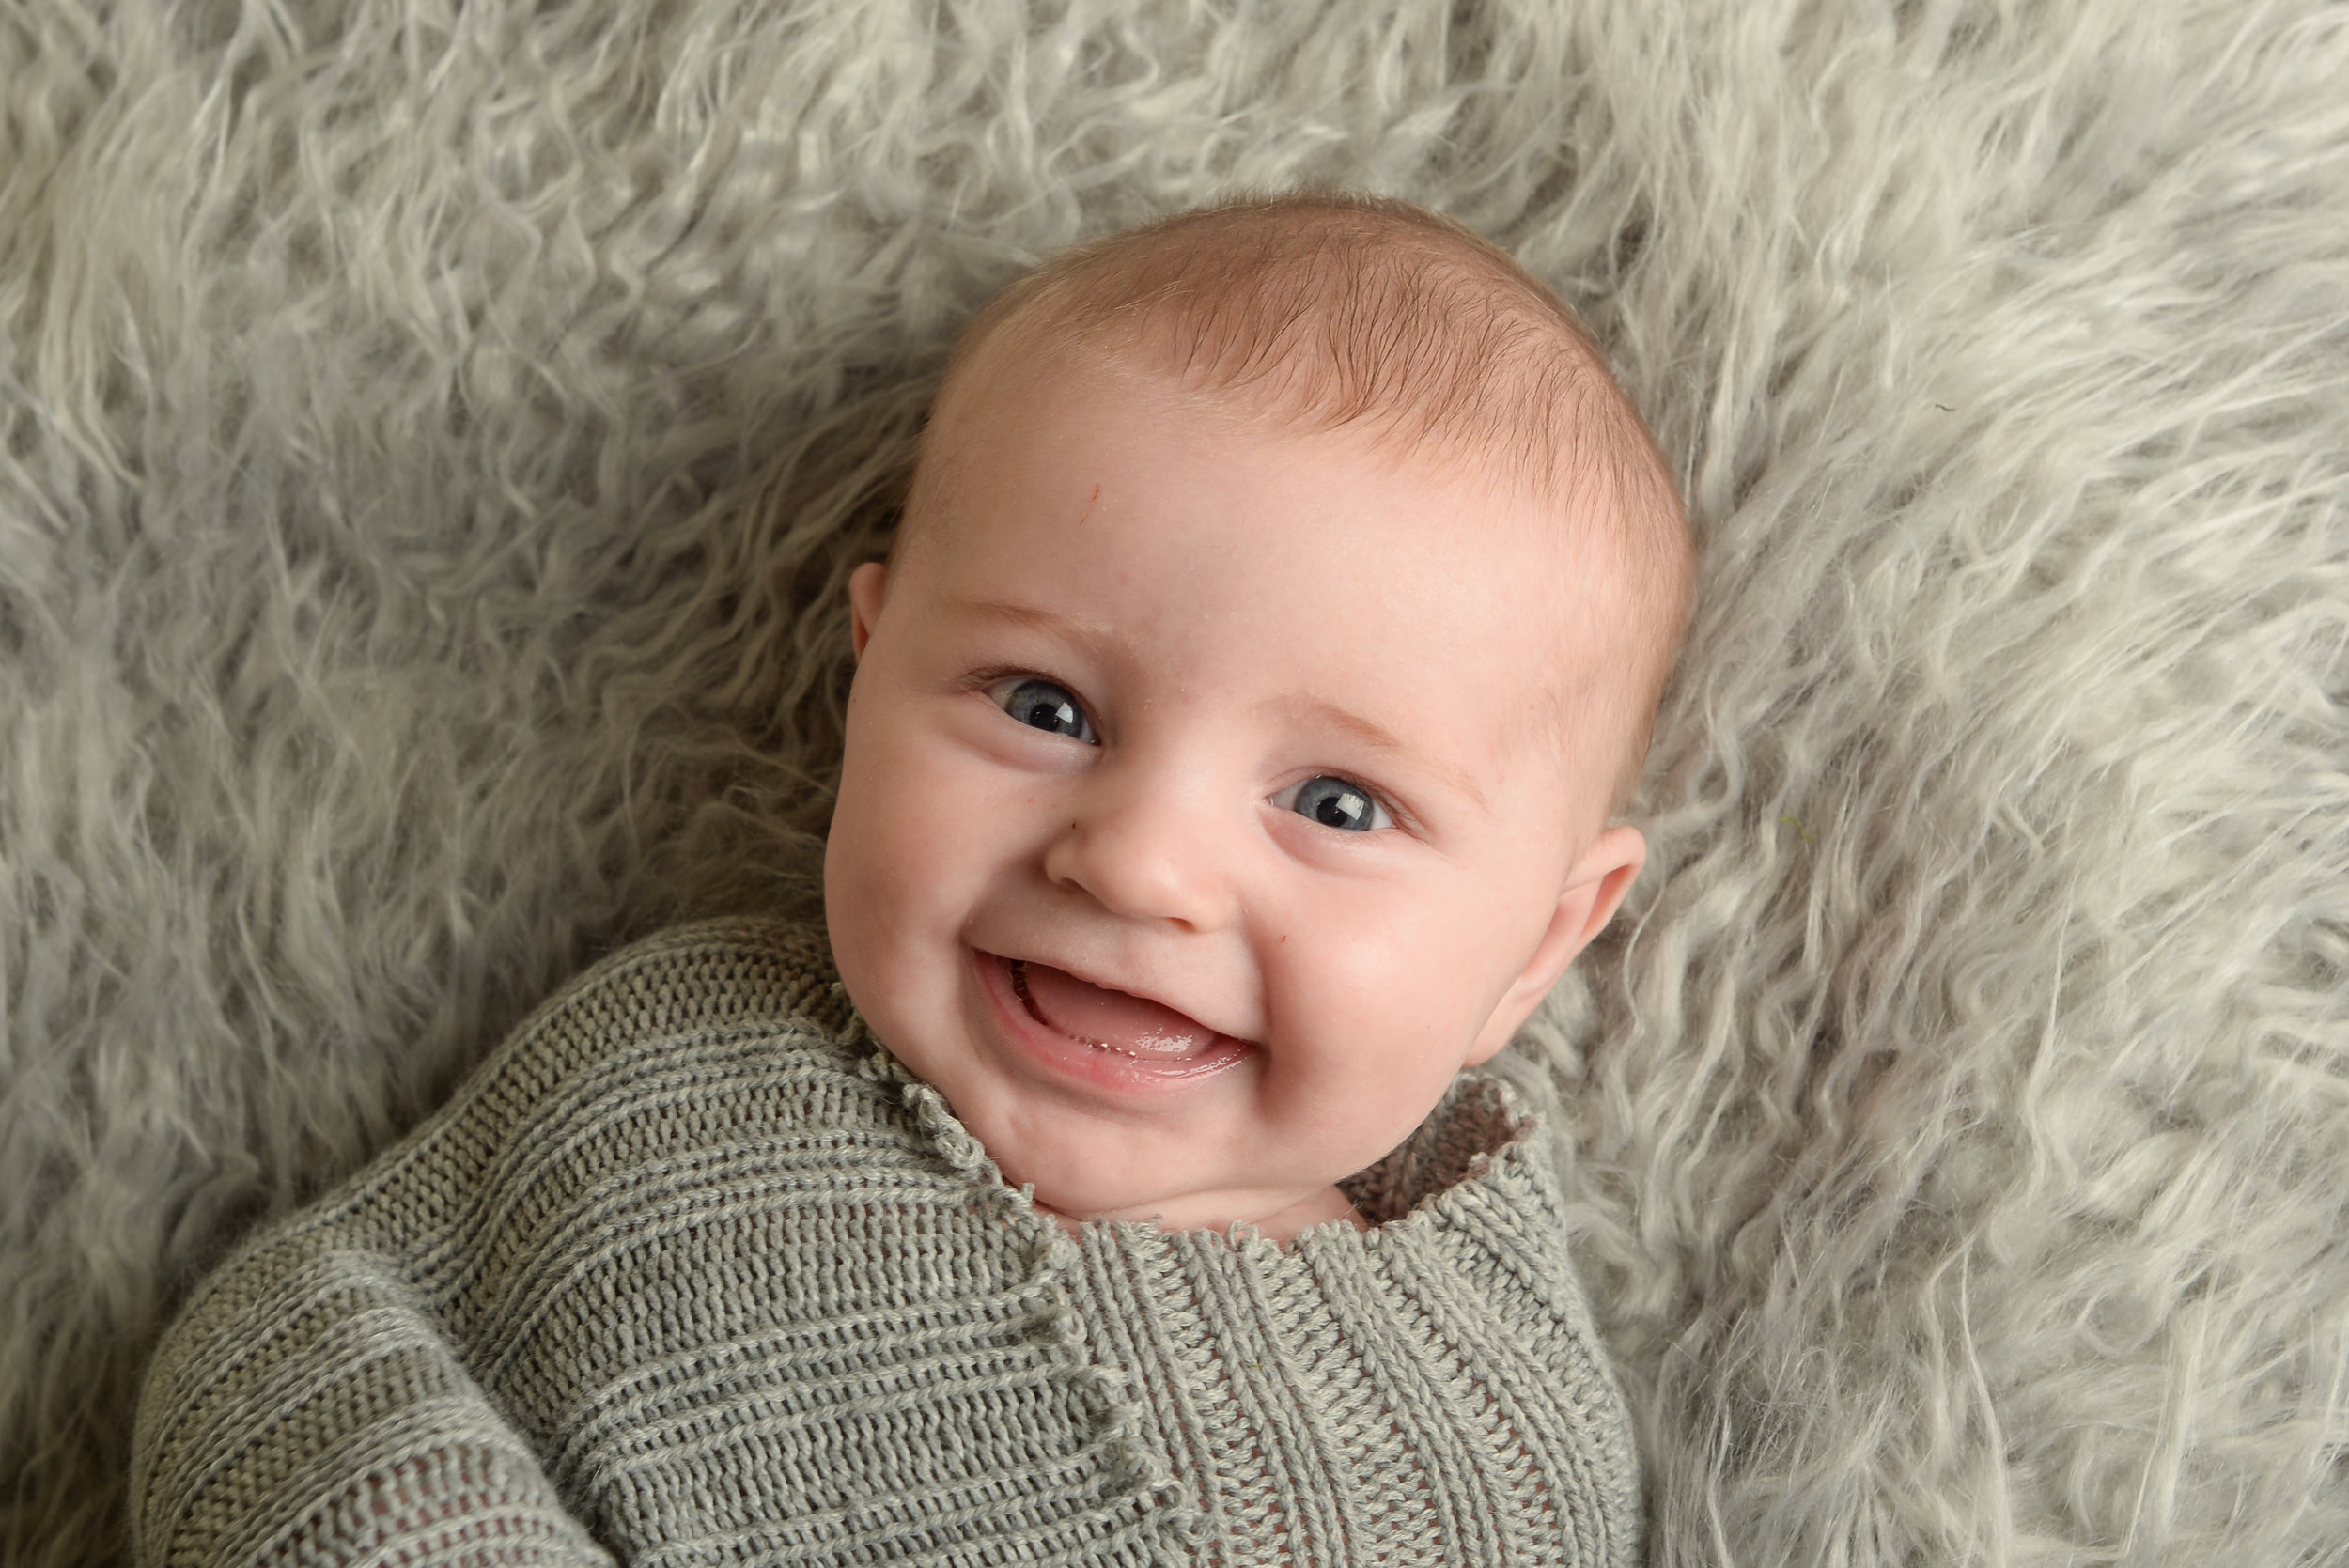 st-louis-photography-studio-three-month-milestone-session-boy-on-gray-fur-with-grey-wrap-smiling.jpg